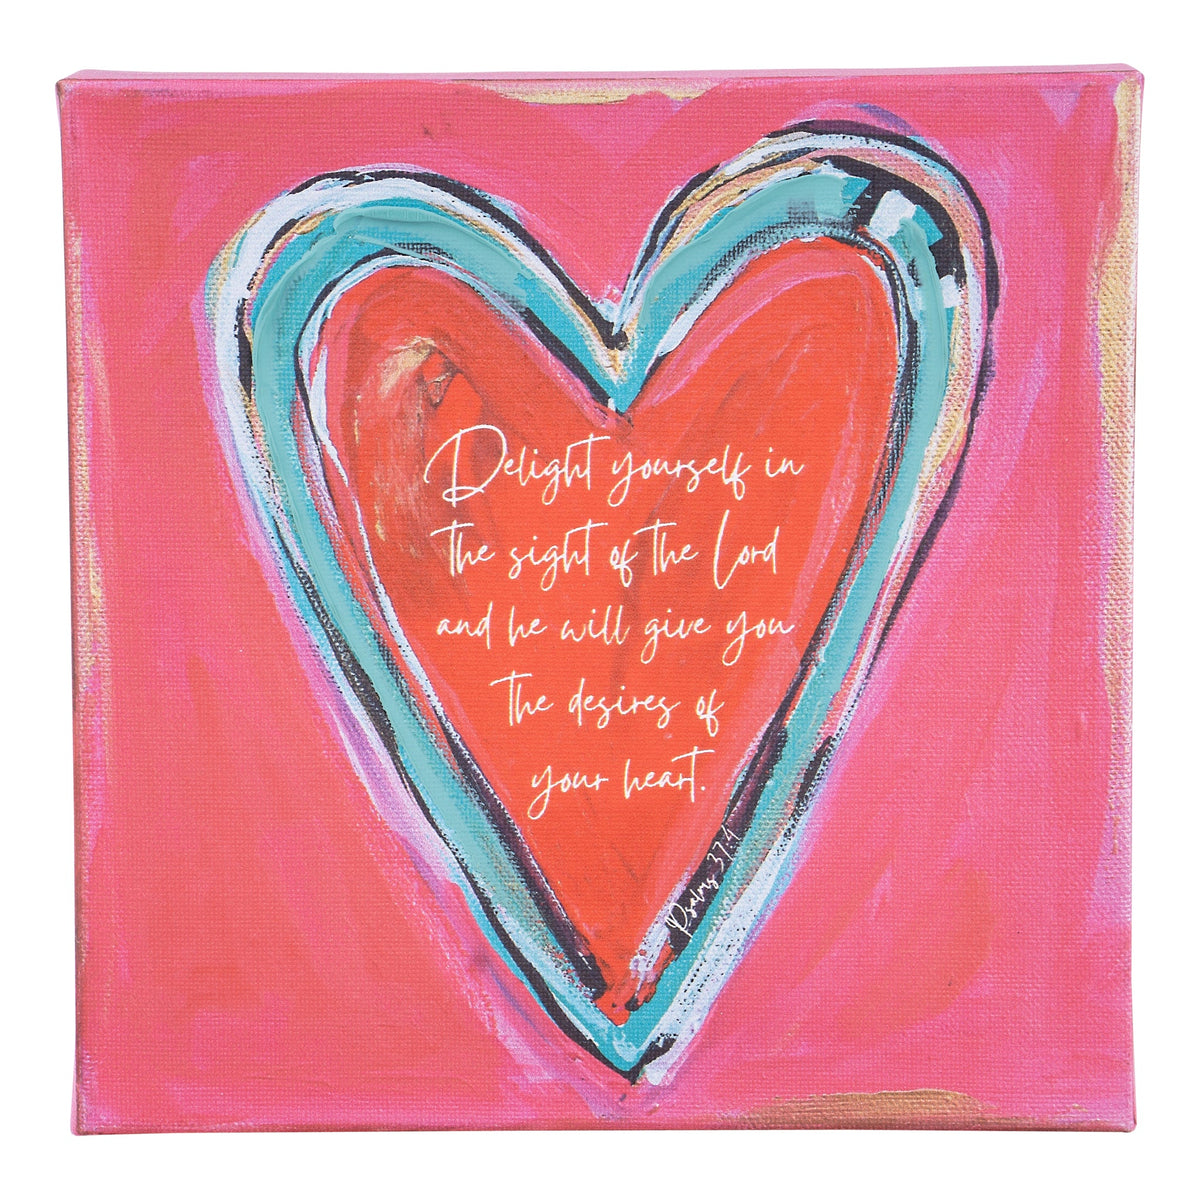 Desires of your Heart Canvas